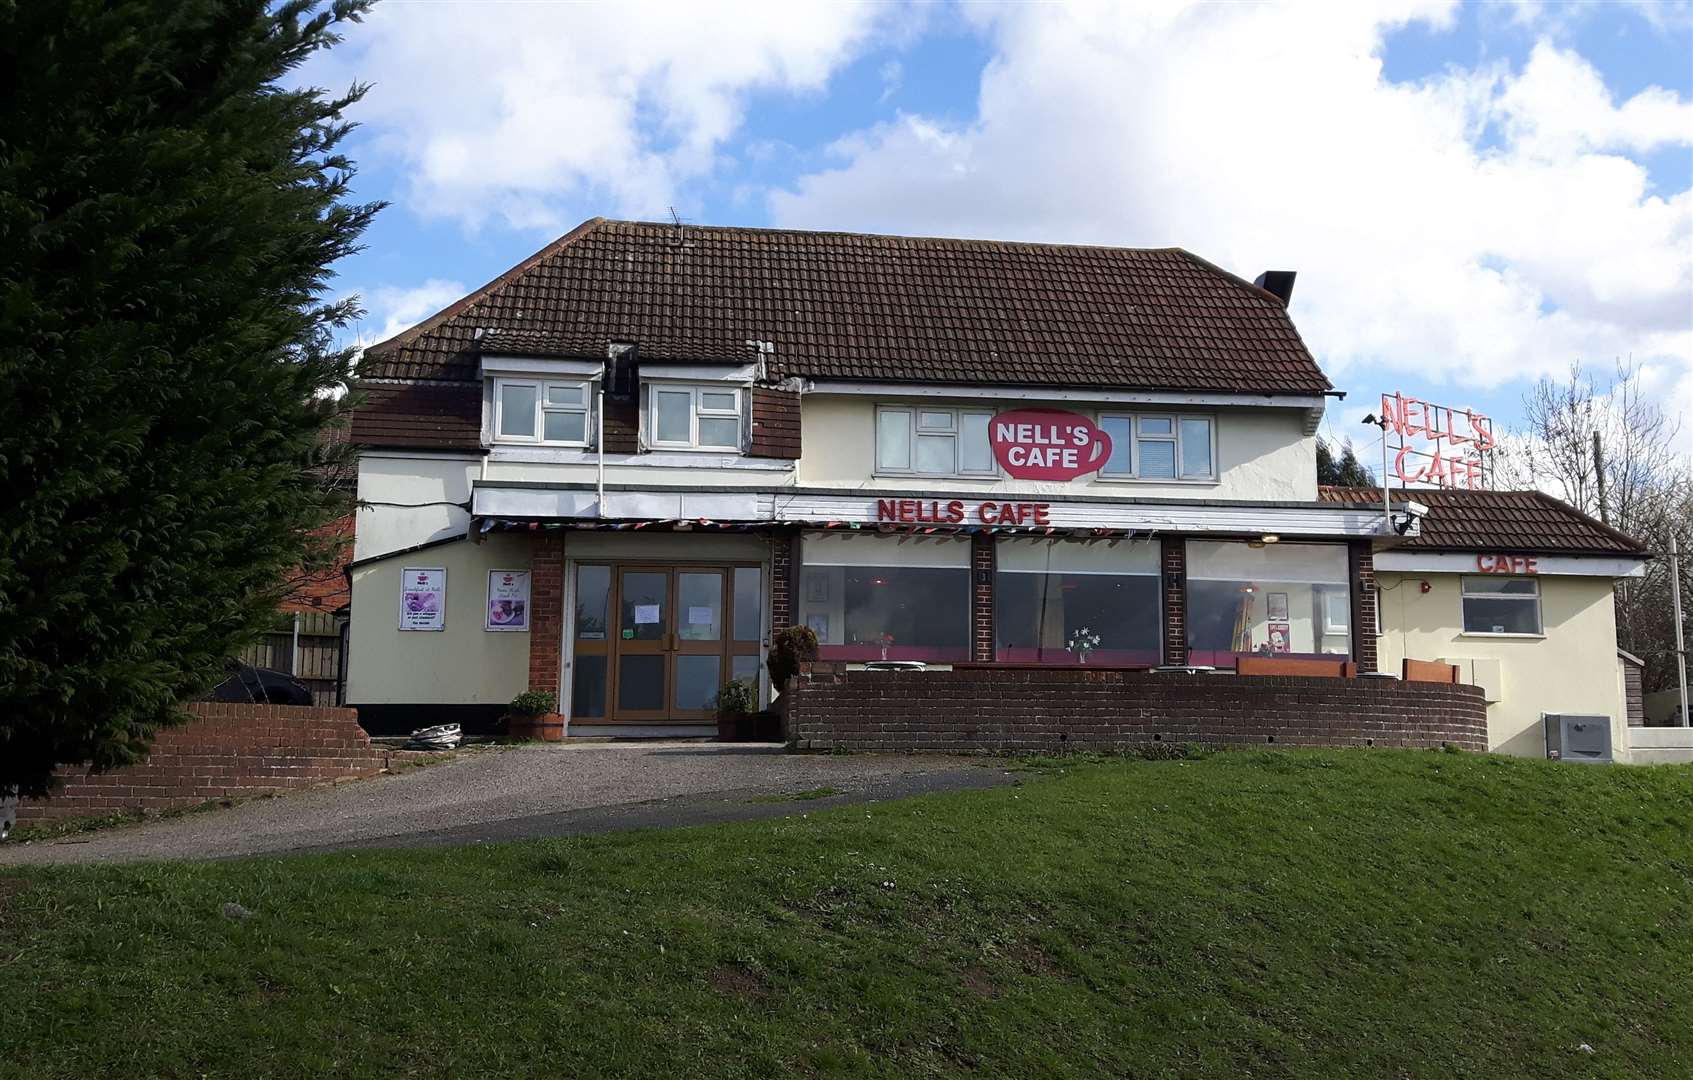 Nell's Cafe in Gravesend has been used as a location in Idris Elba's comedy series In The Long Run